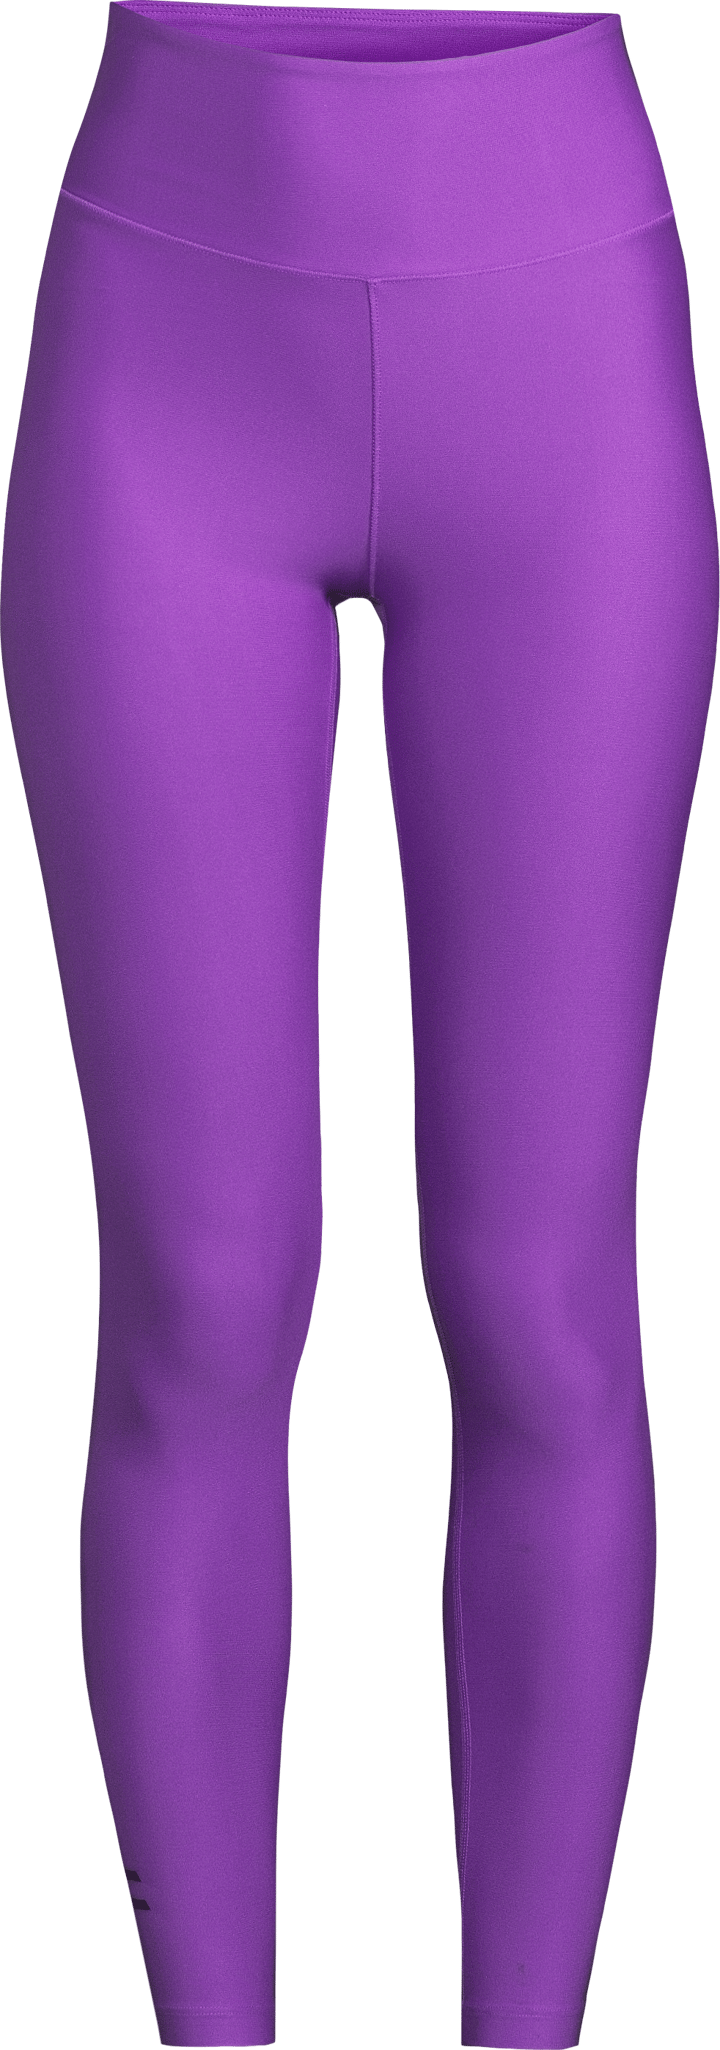 Women's Graphic Sport Tights Liberty Lilac Casall